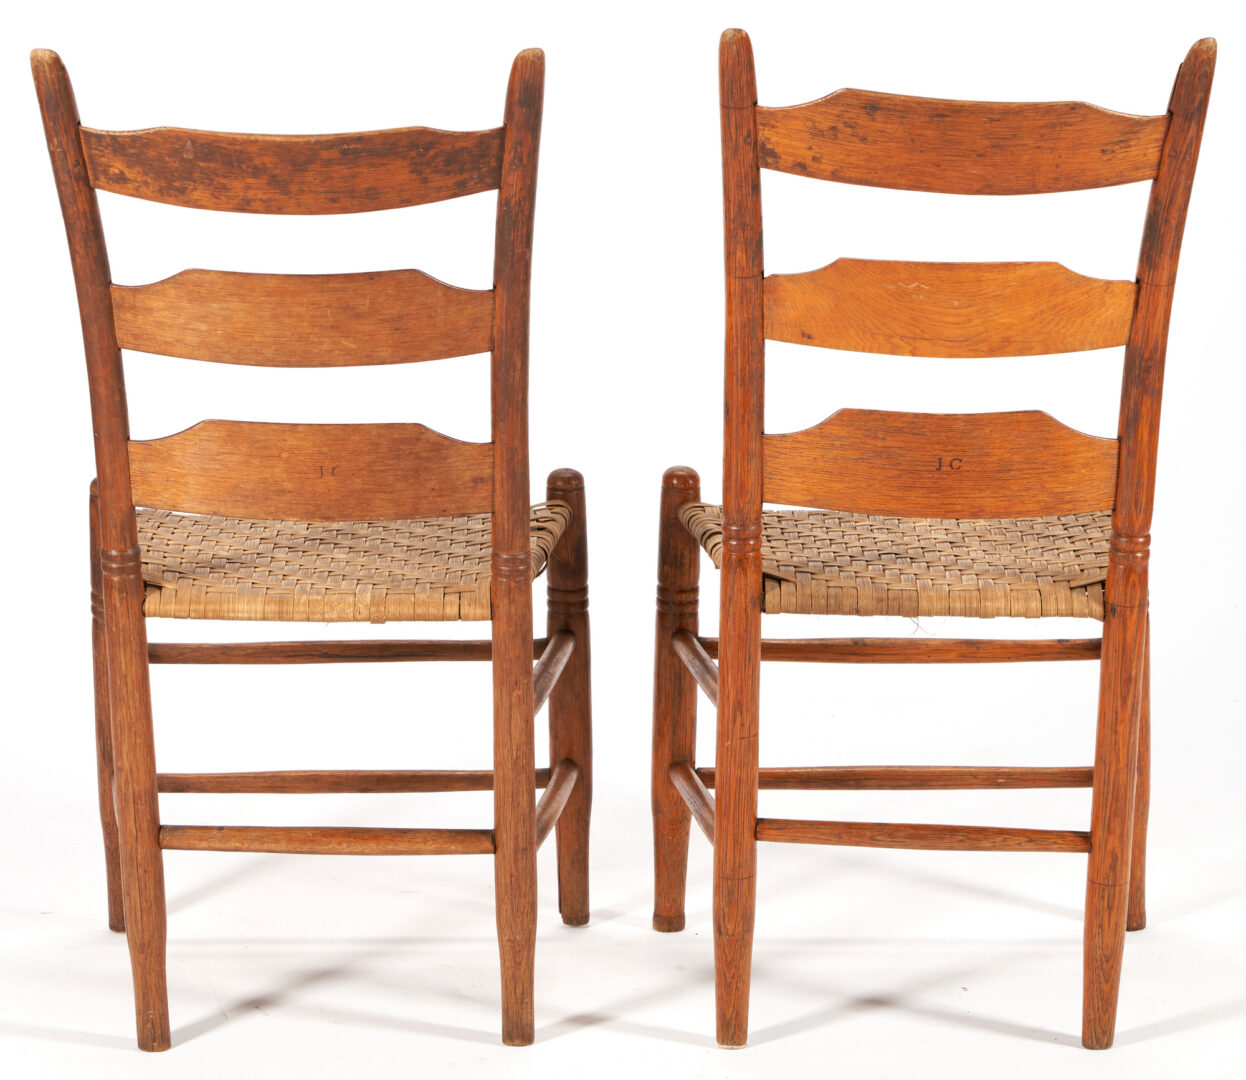 Lot 185: 5 Middle TN Chairs, Marked and Exhibited